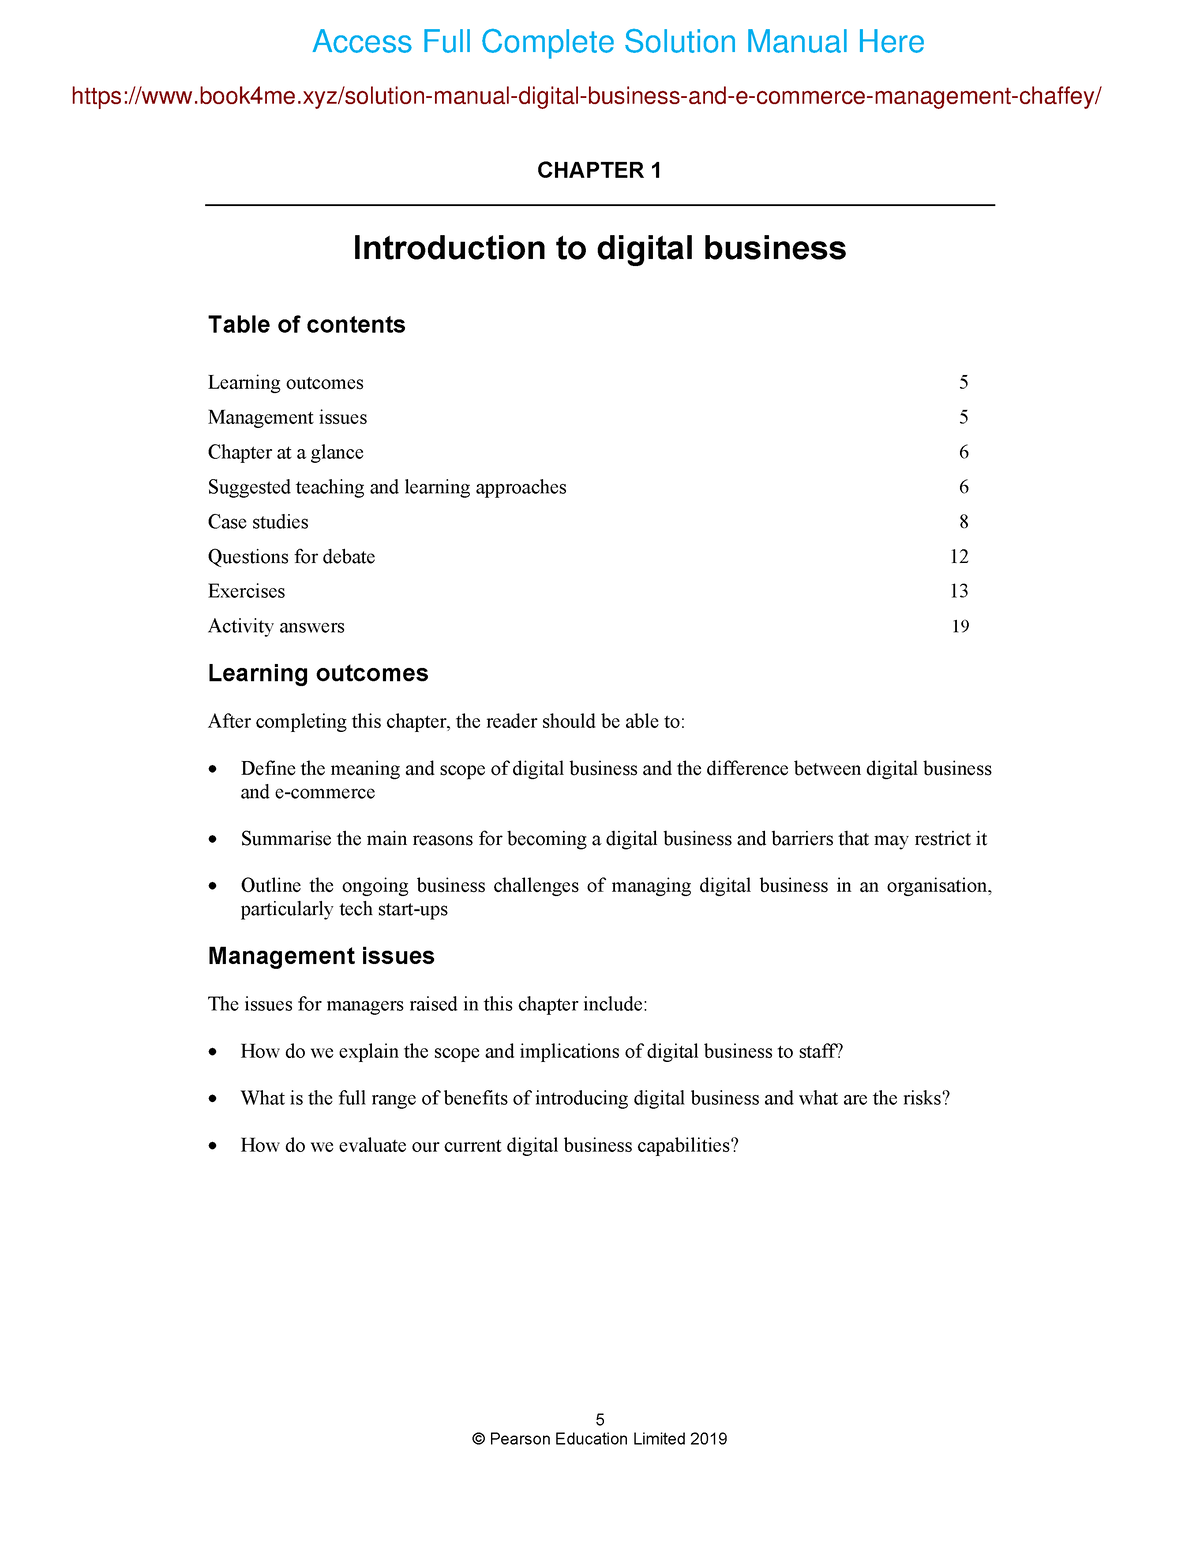 484435047 Solution Manual for Digital Business and E Commerce Management 7th Edition by Dave Chaffey - Studocu